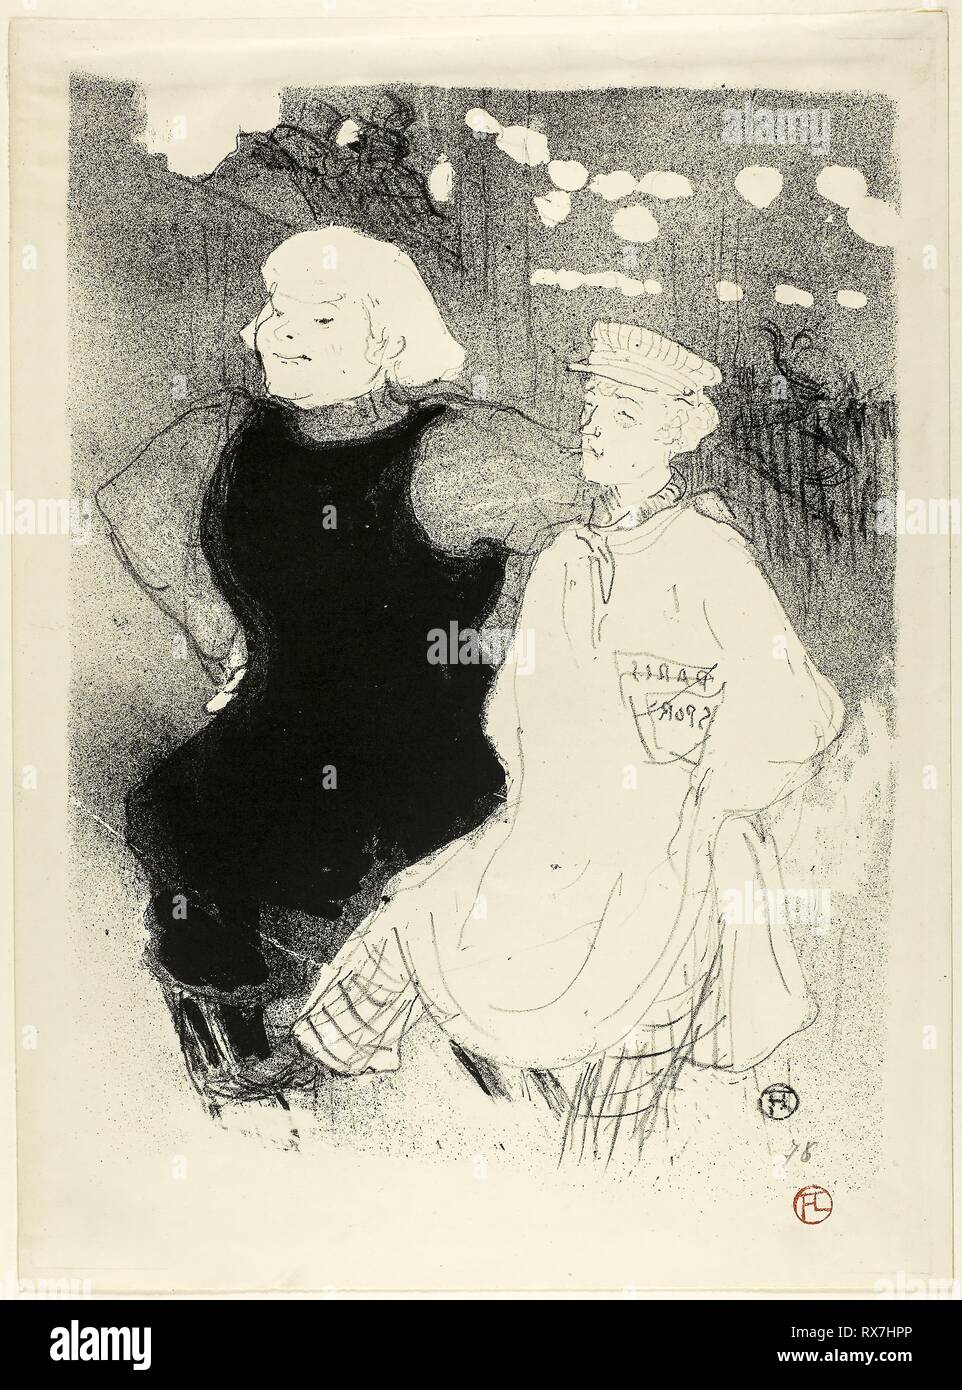 At the Moulin Rouge: the Franco-Russian Alliance. Henri de Toulouse-Lautrec; French, 1864-1901. Date: 1893. Dimensions: 344 × 250 mm (image); 380 × 280.5 mm (sheet). Lithograph on cream wove paper. Origin: France. Museum: The Chicago Art Institute. Stock Photo